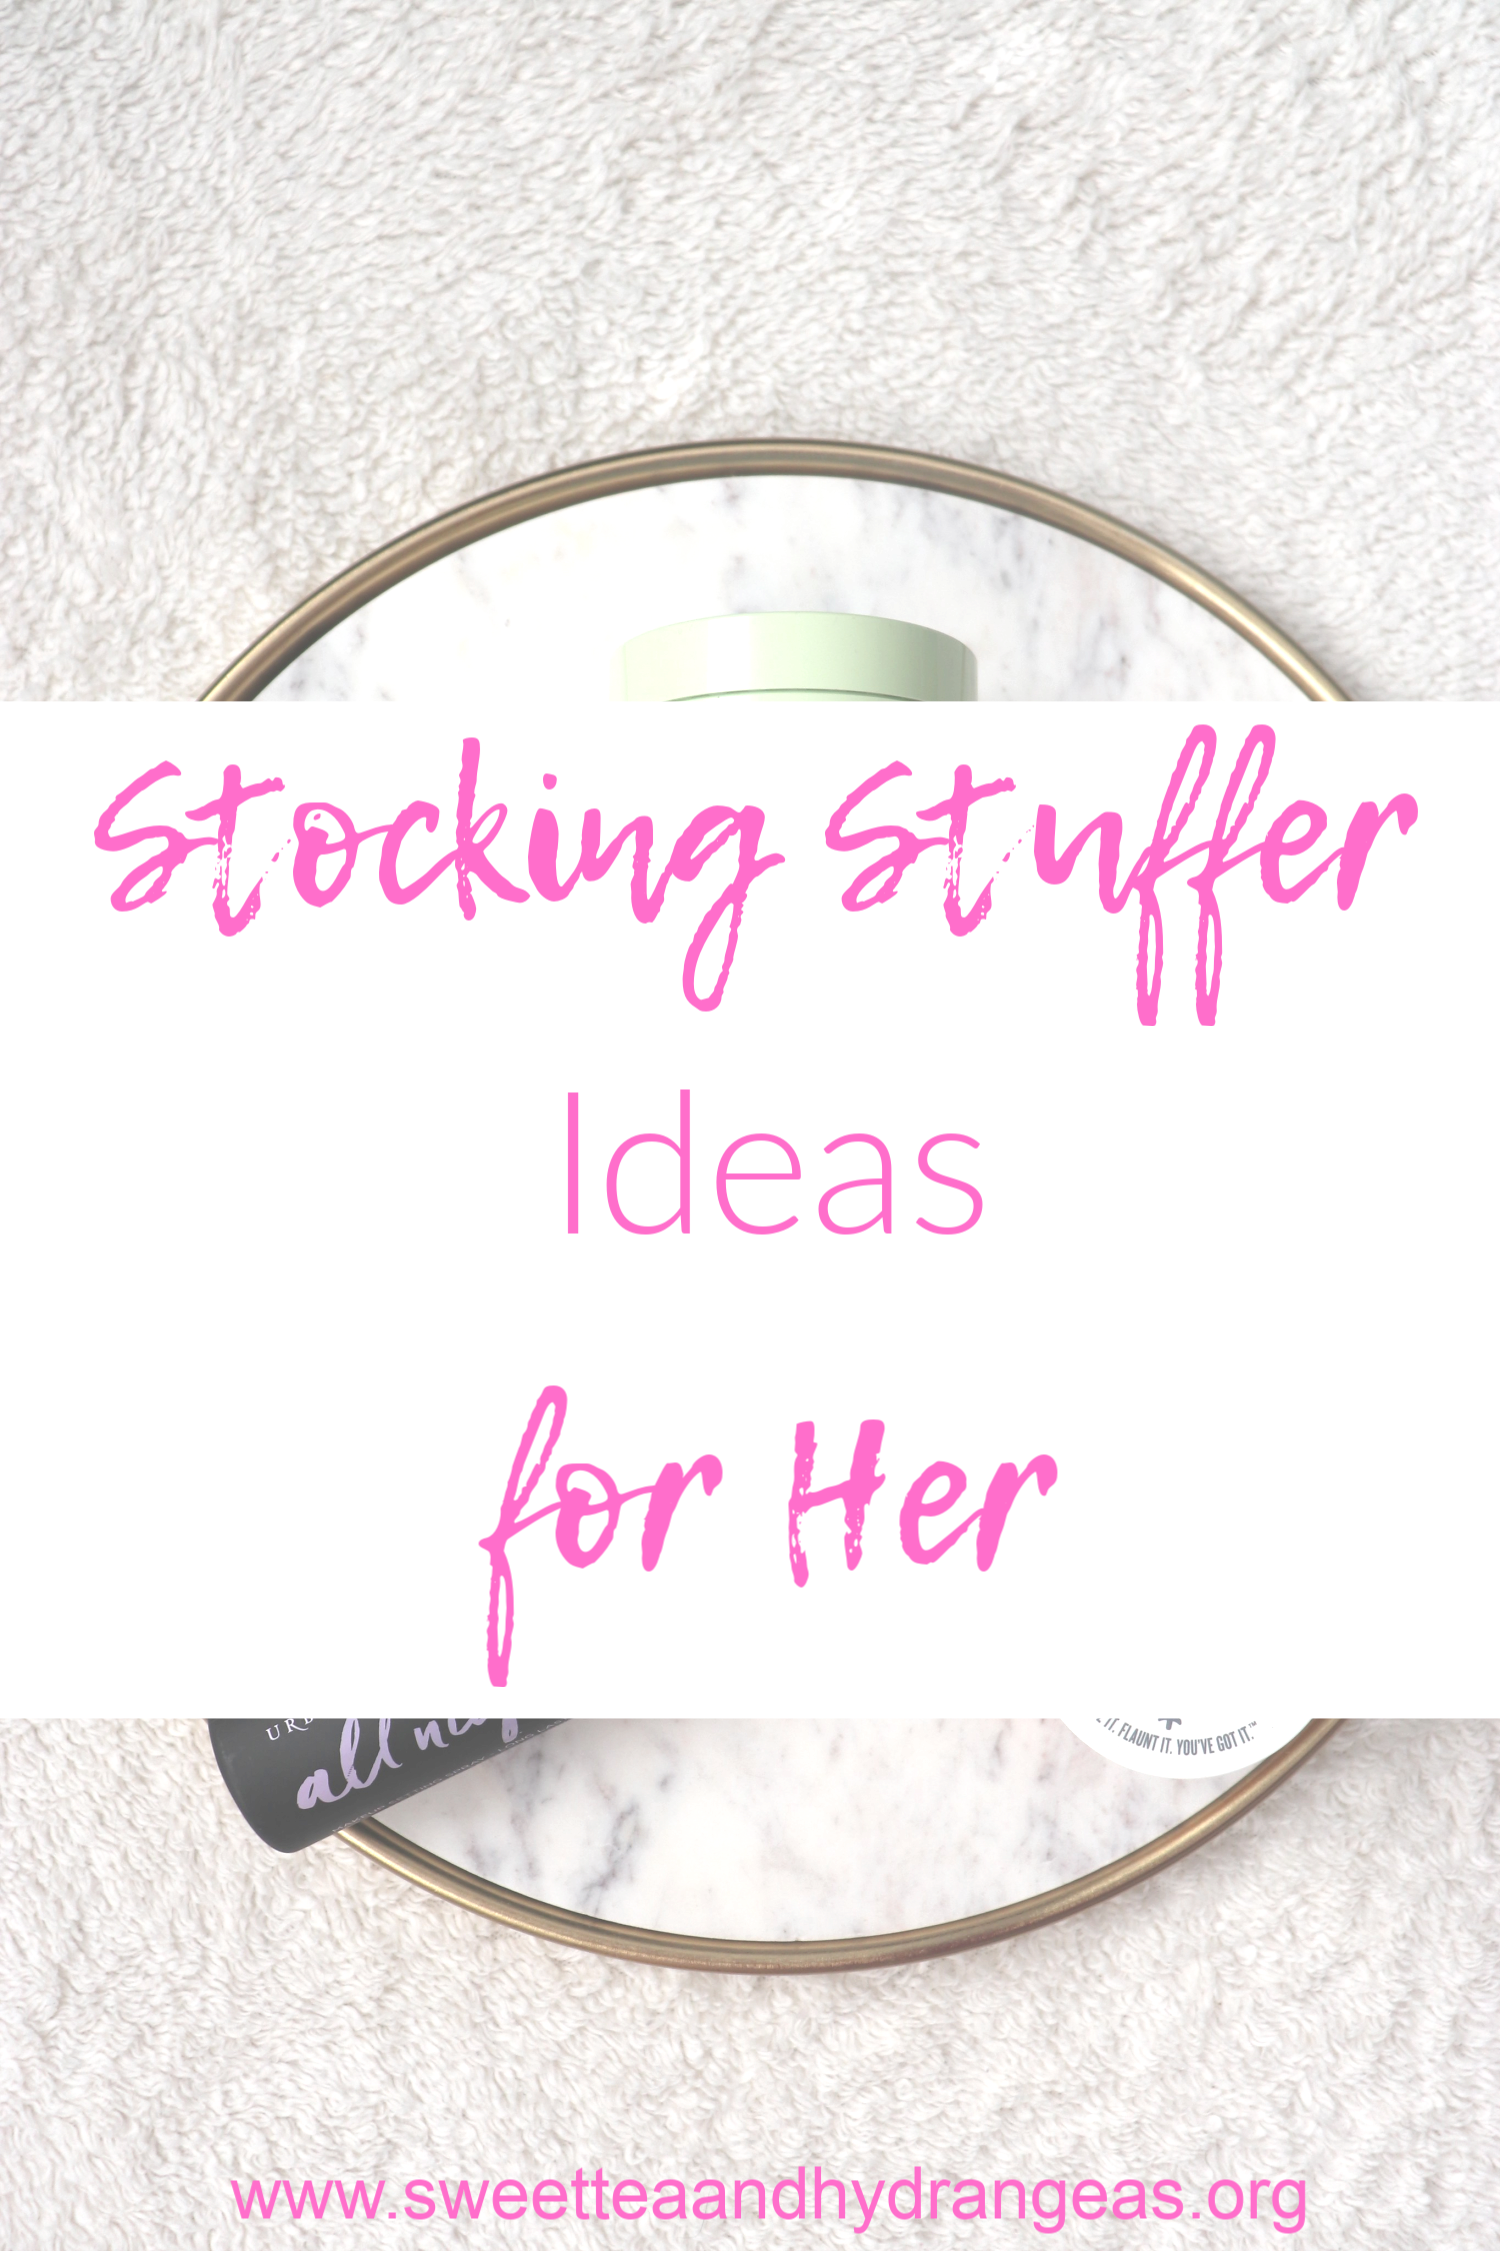 STH Stocking Stuff Ideas for Her